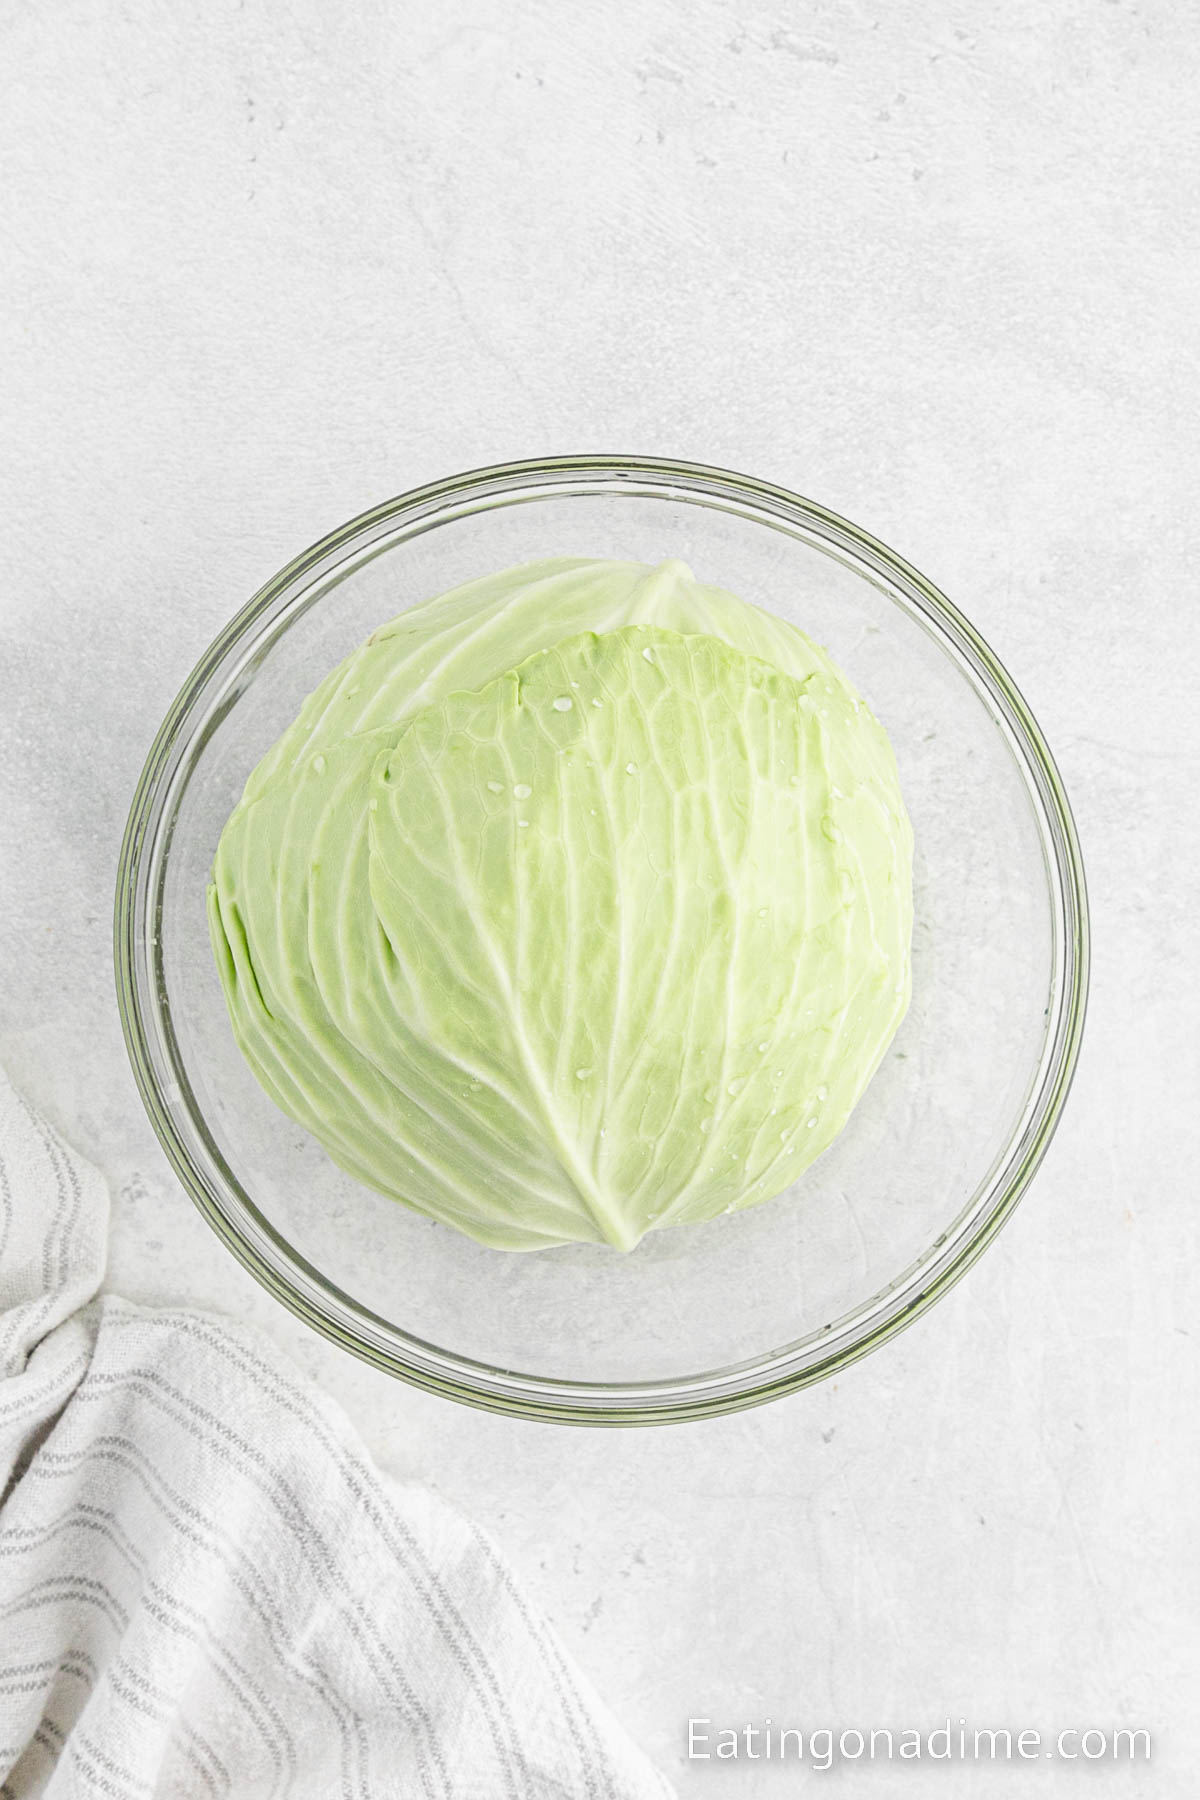 Placing the cabbage in a bowl